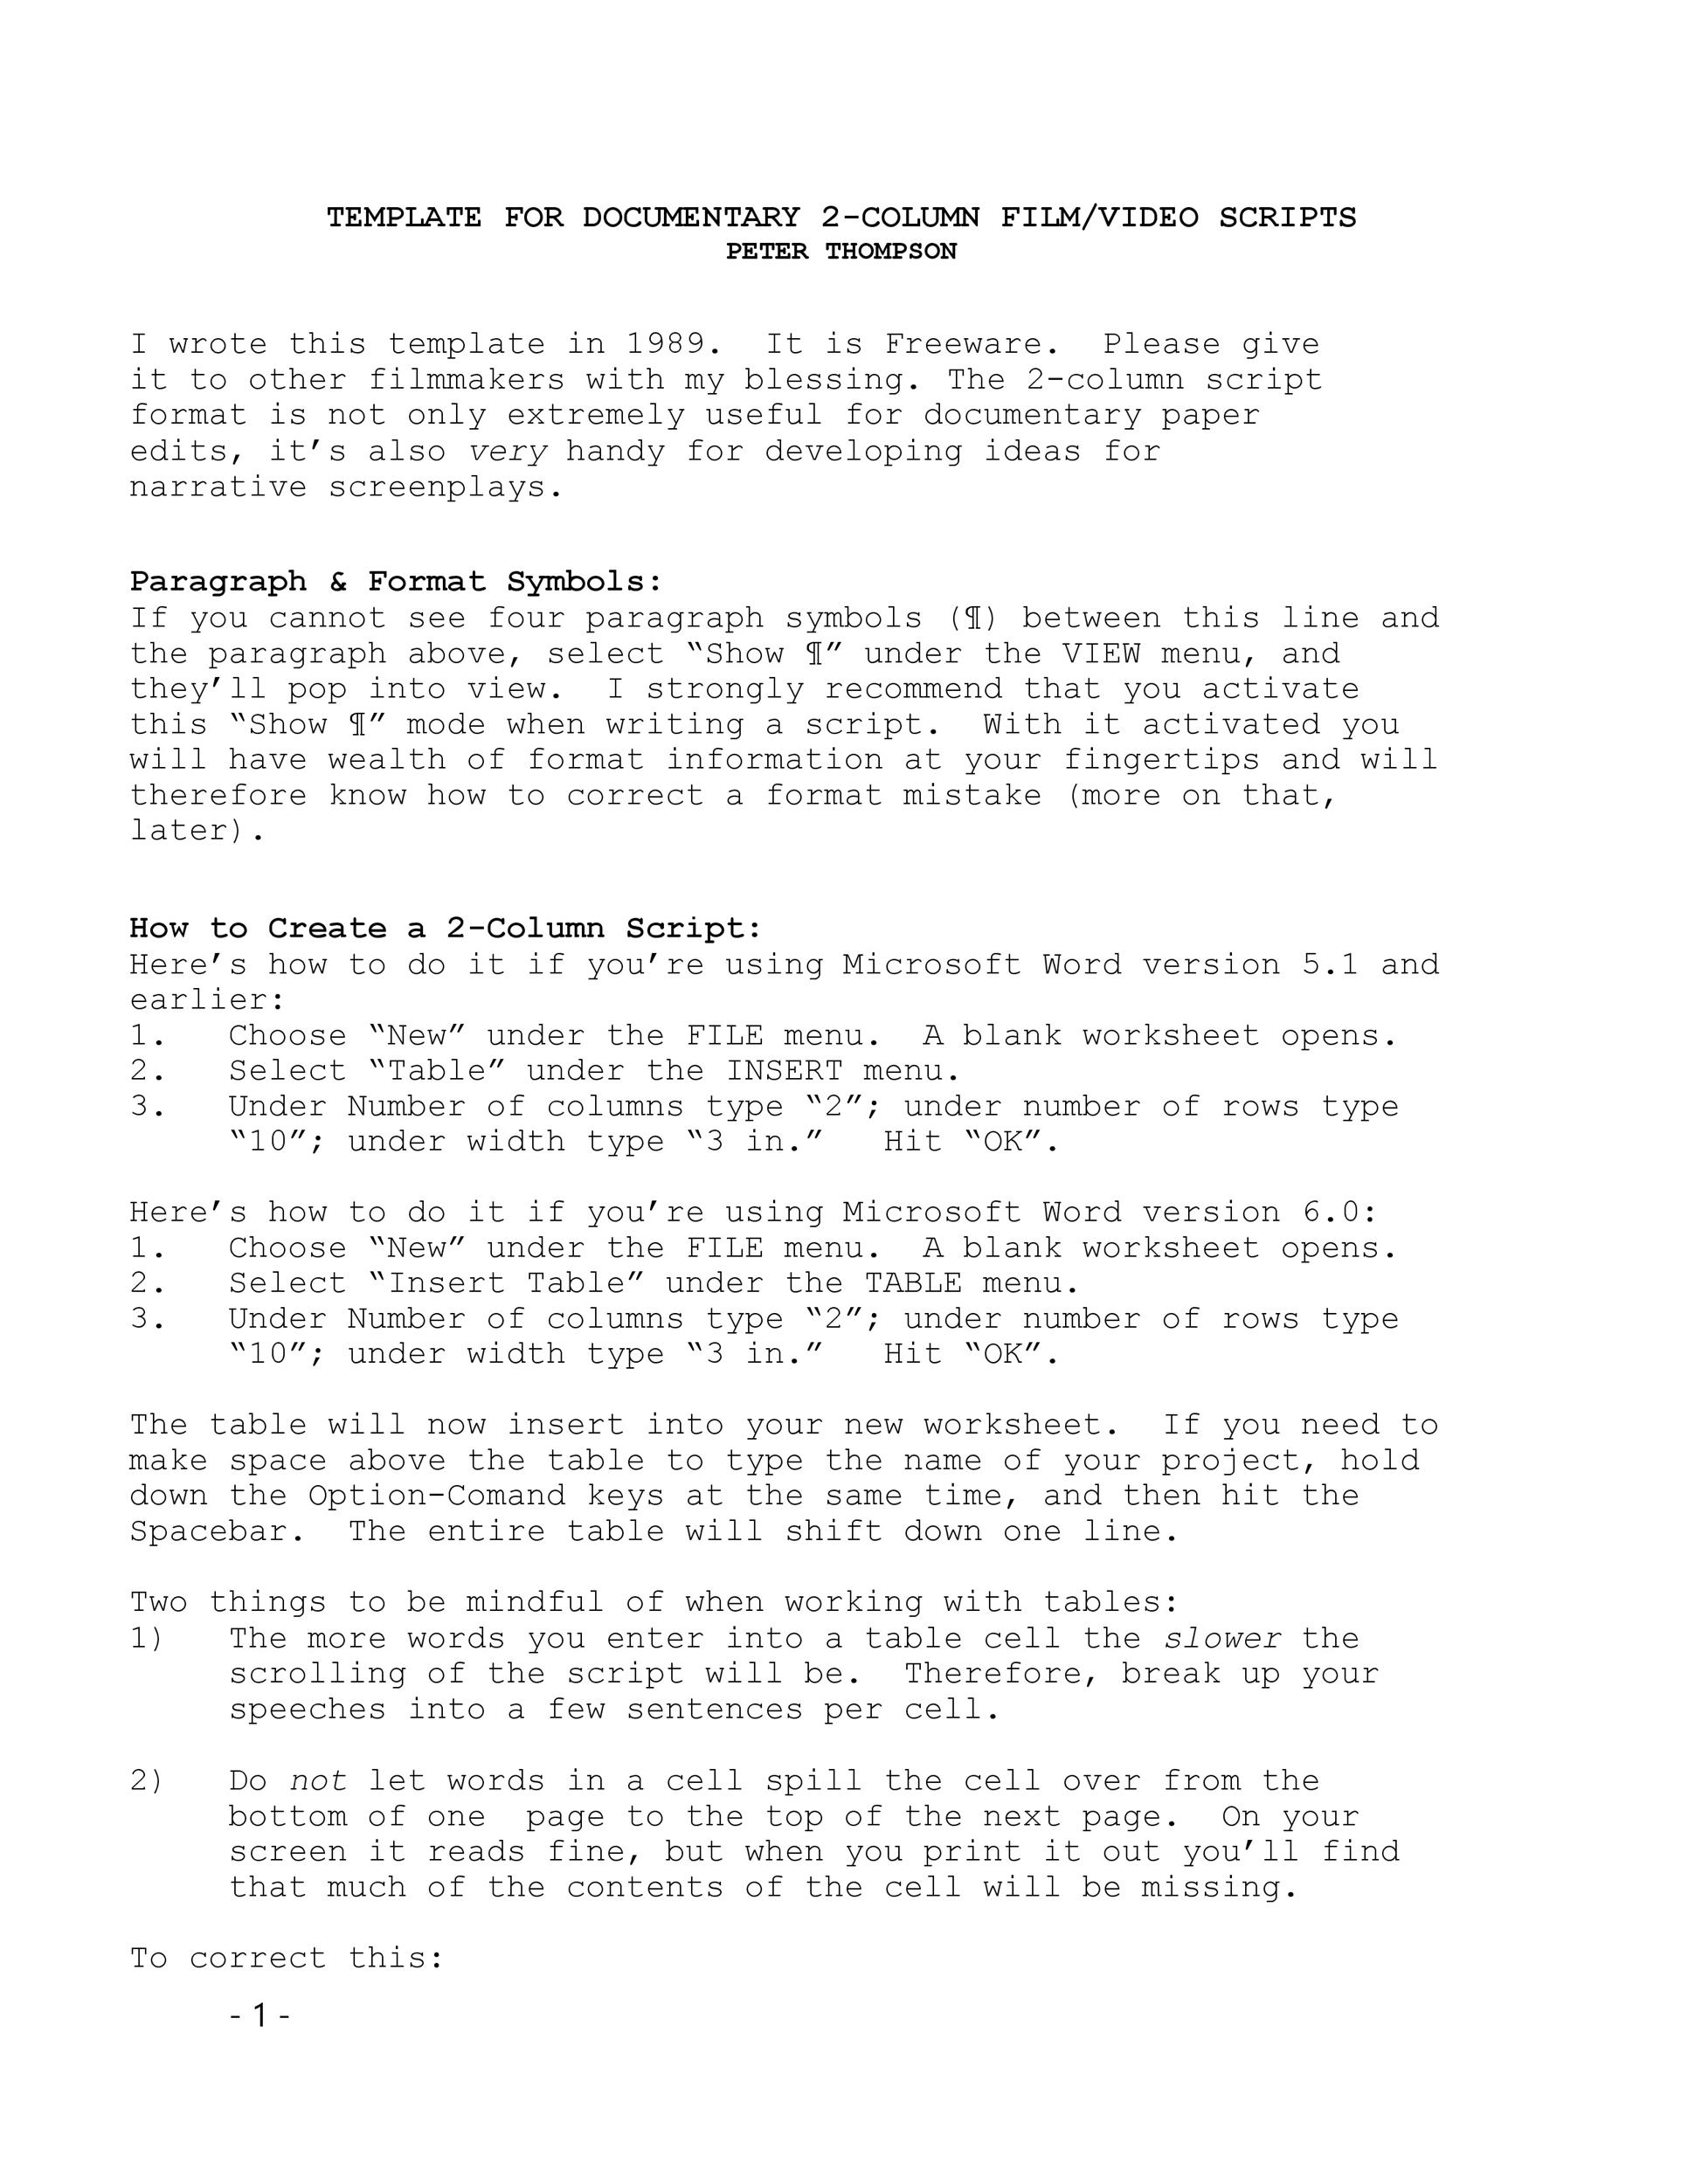 Short Story Template Word from templatelab.com